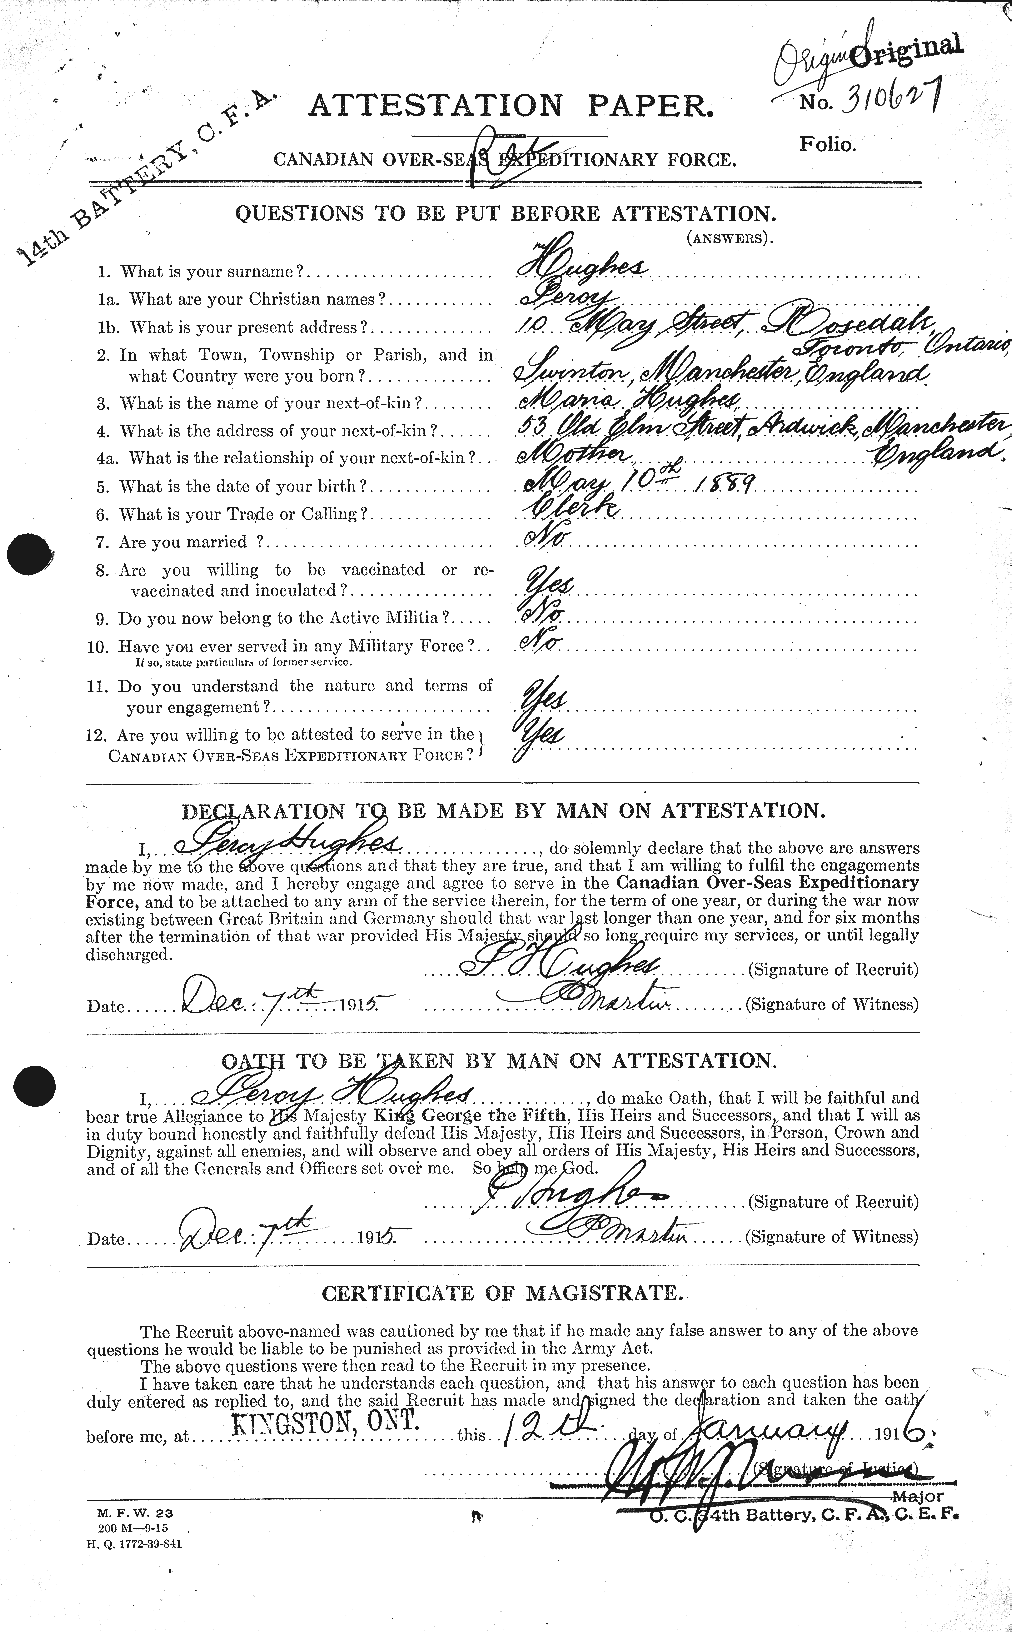 Personnel Records of the First World War - CEF 404153a